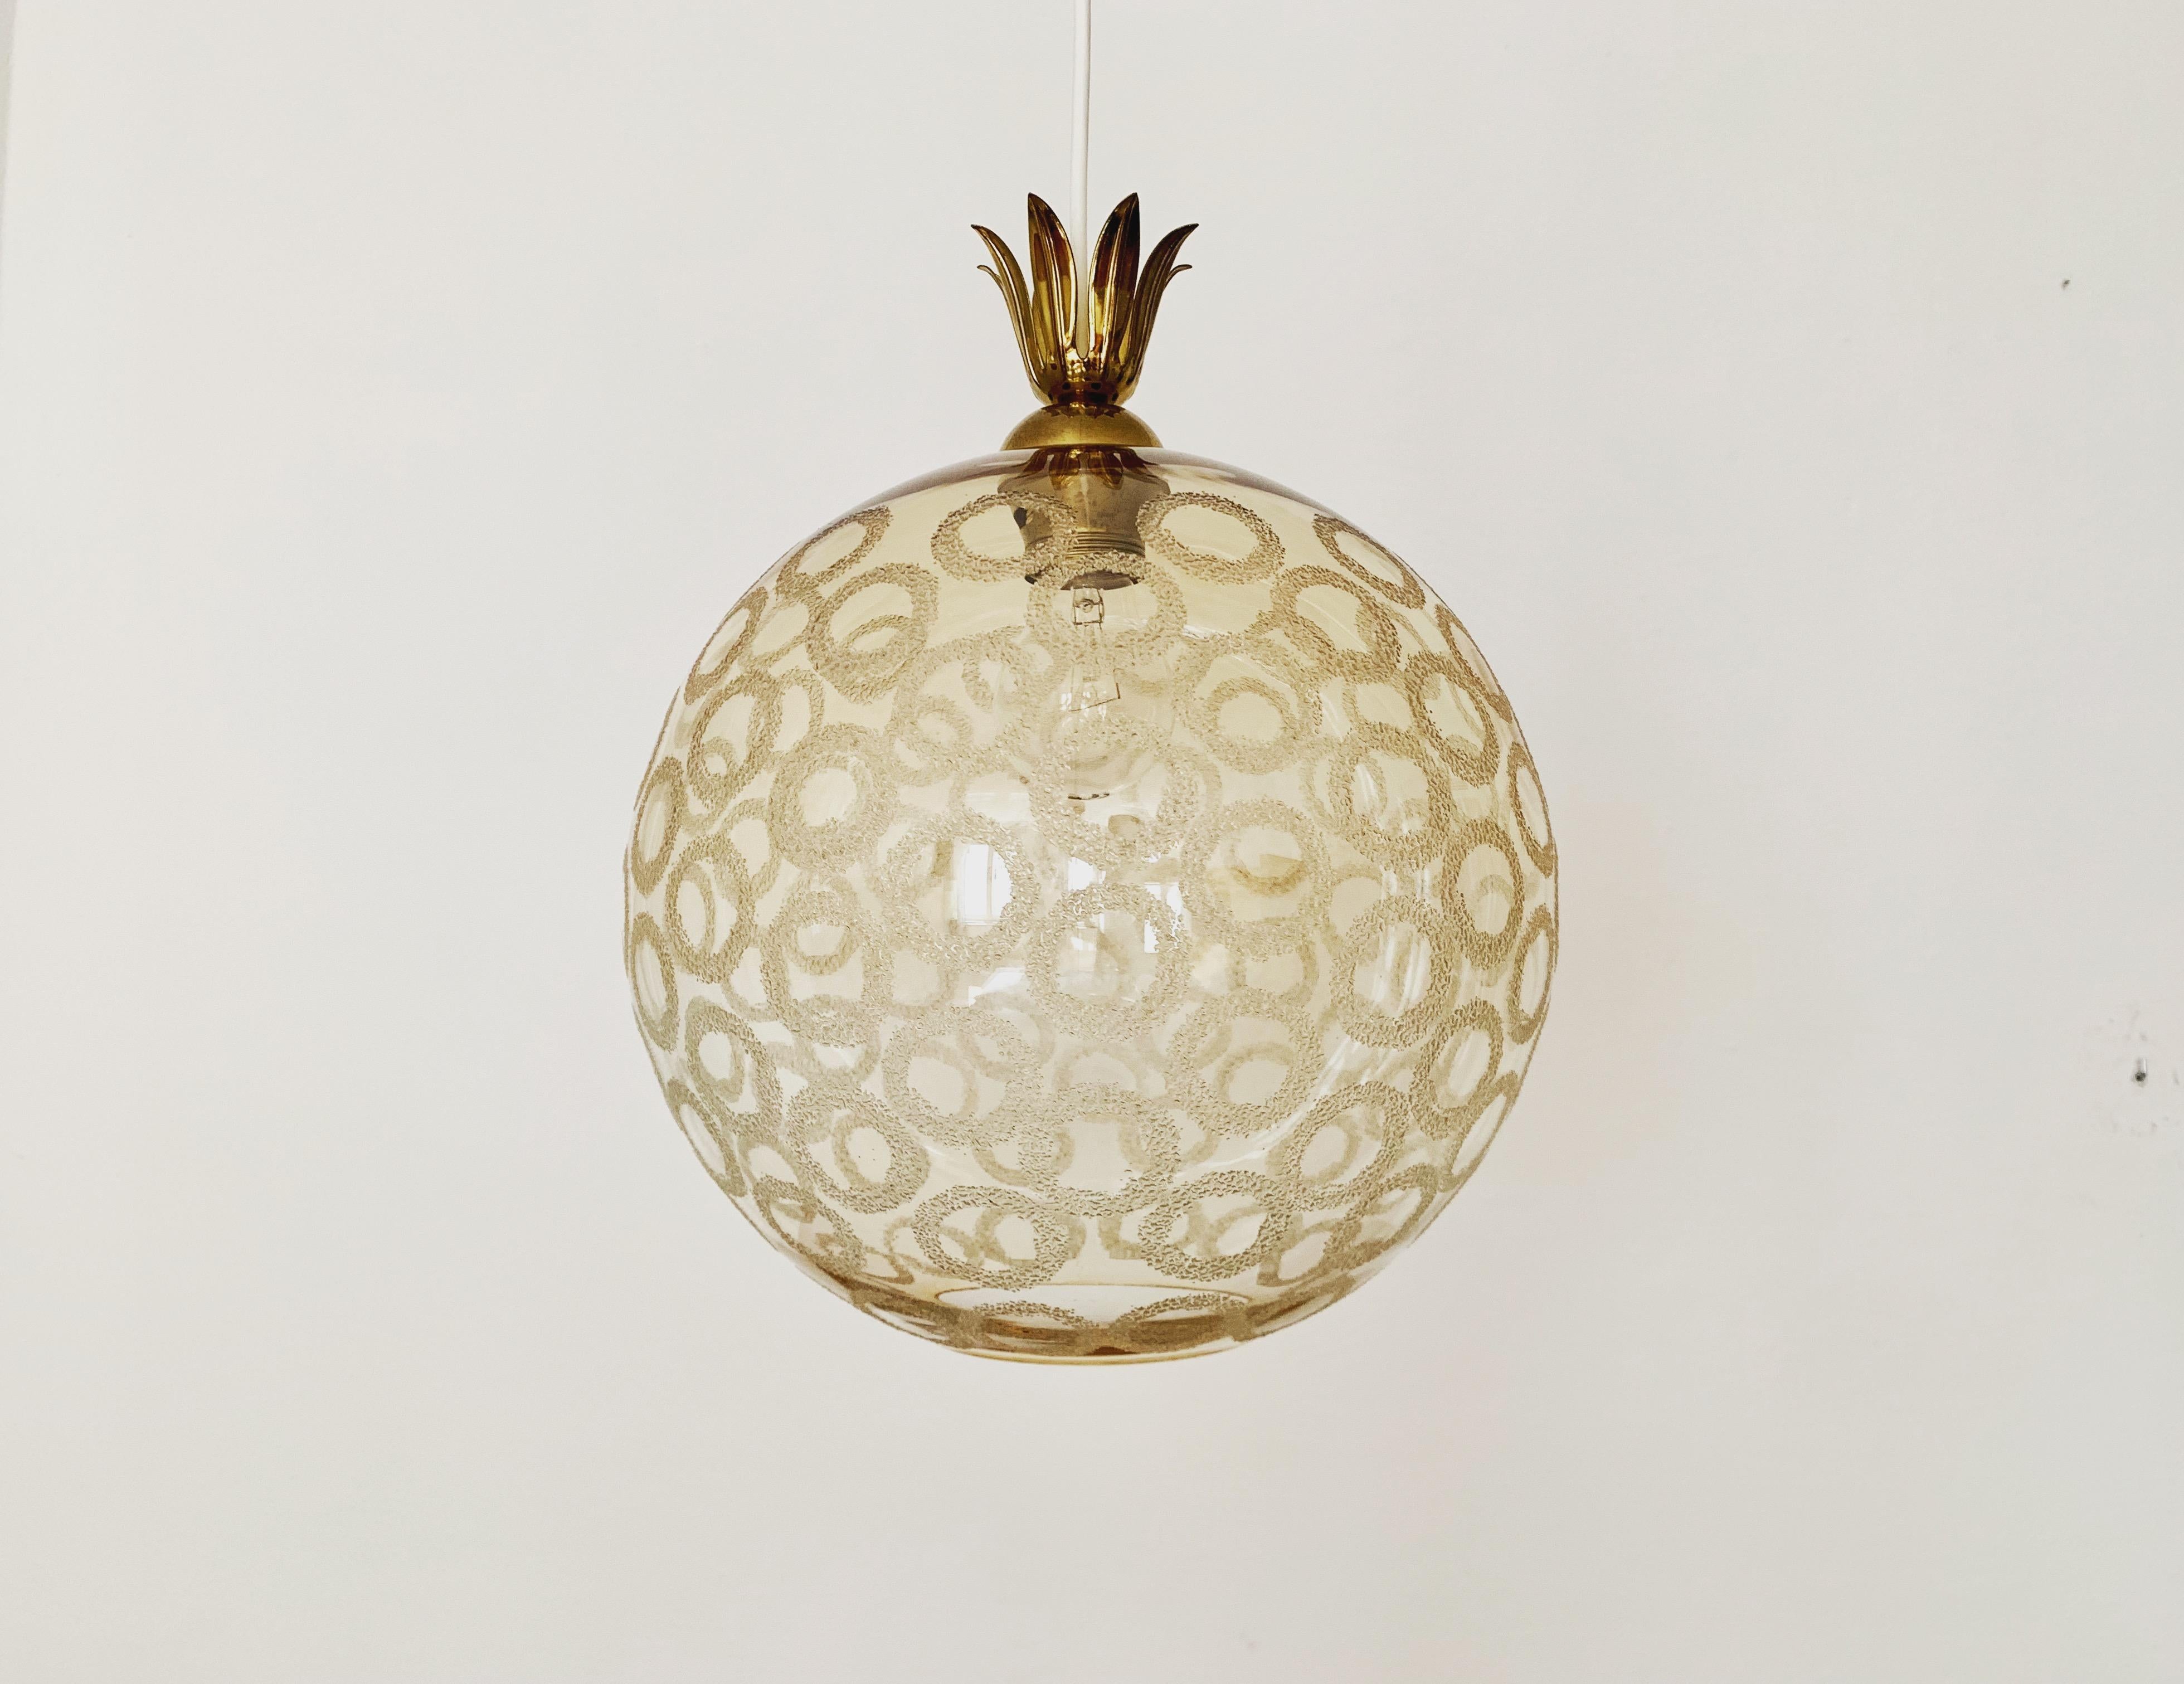 Very nice bubble glass pendant lamp from the 1950s.
The lamp makes a great play of light in the room and enchants with its charisma.
Extraordinary design with lovely details.

Condition:

Very good vintage condition with slight signs of wear